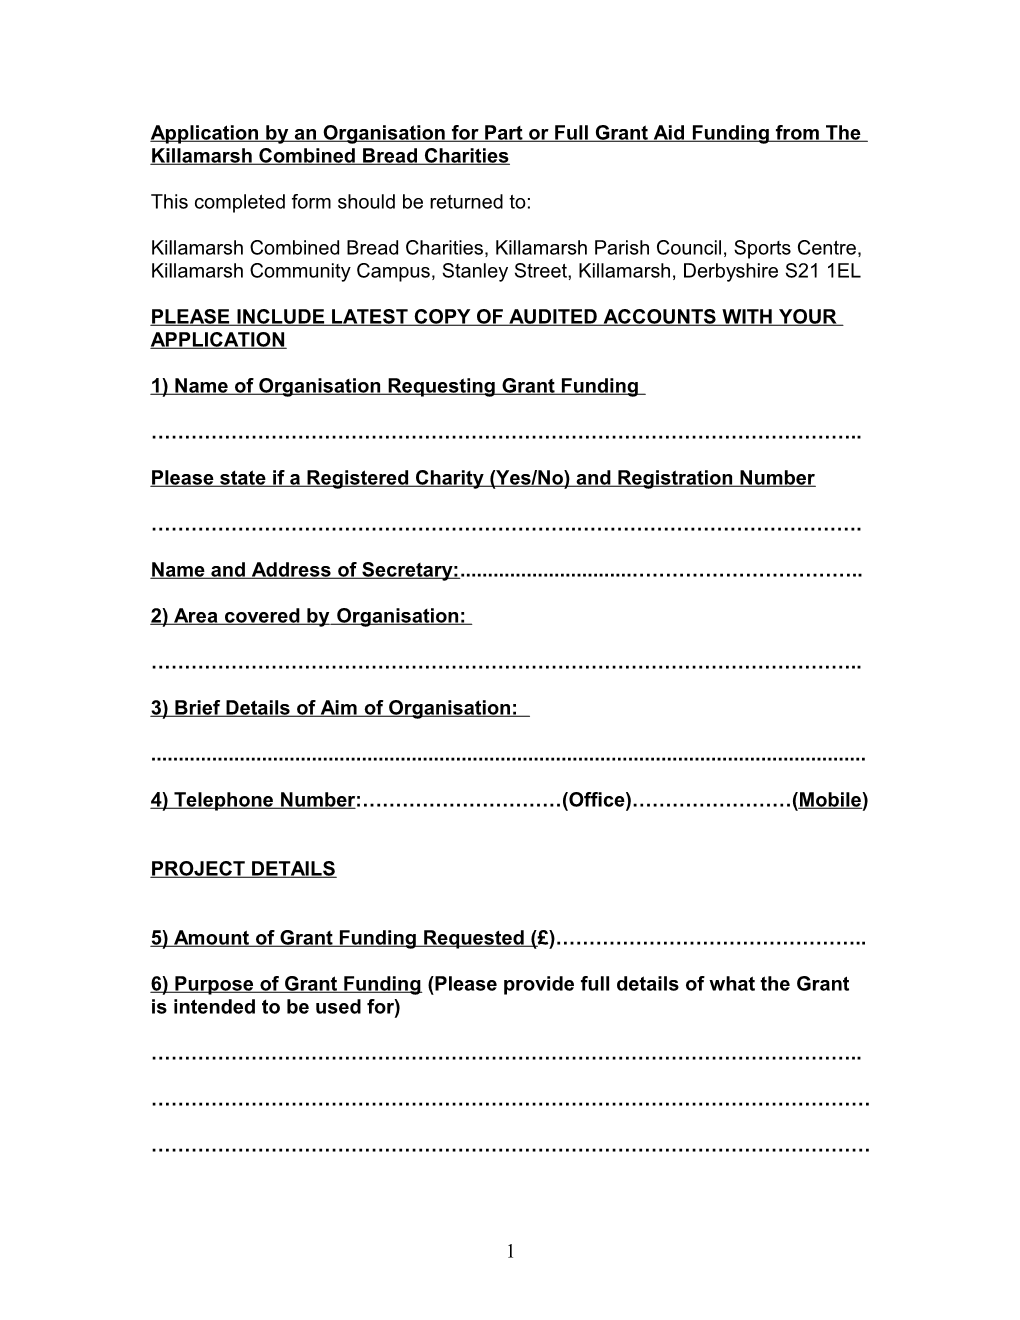 Application for Grant Aid Funding from the Killamarsh Combined Bread Charities